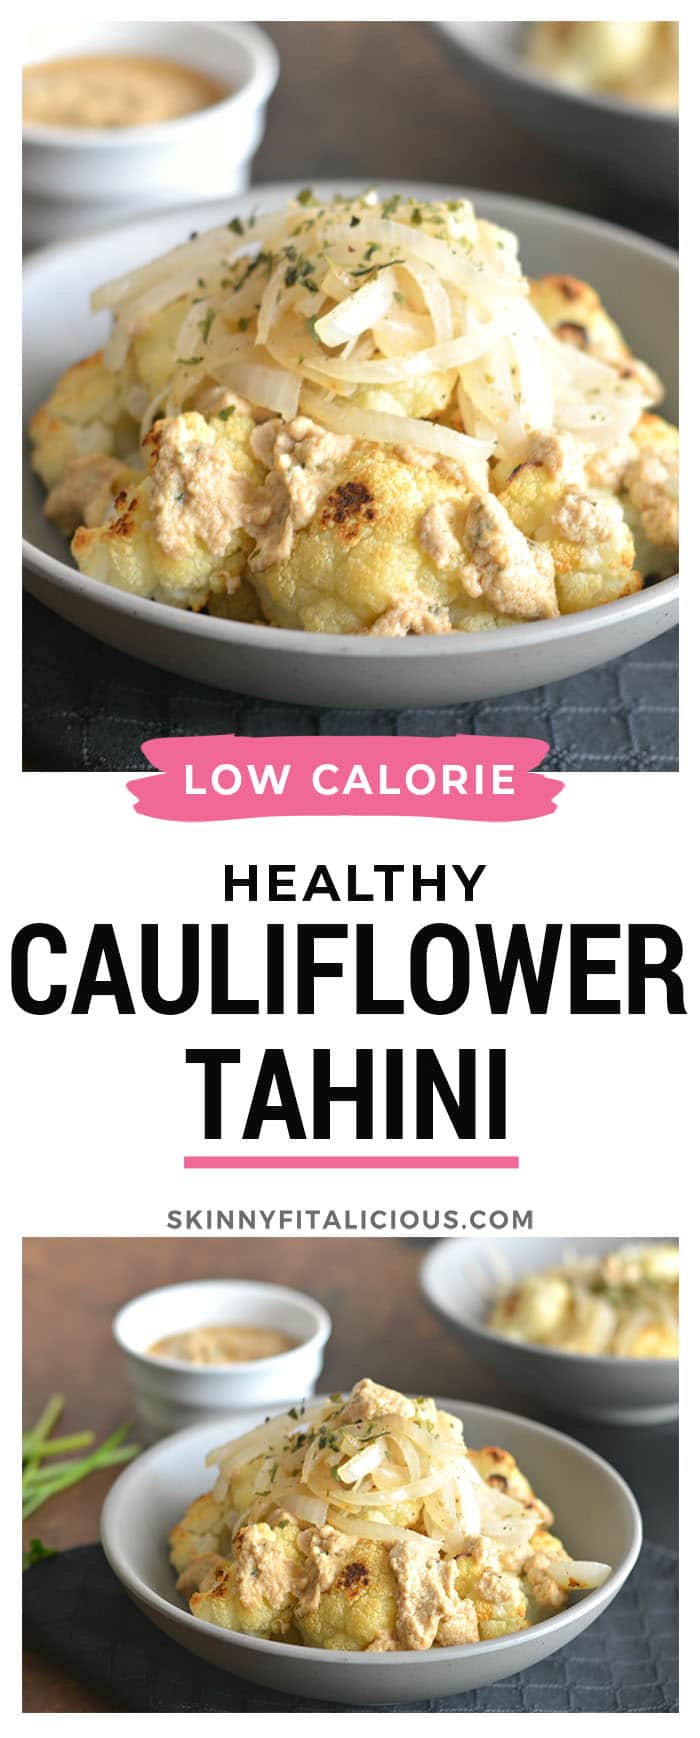 Golden roasted Caramelized Cauliflower with Tahini and fried onions. A delicious gluten free, Paleo, Vegan, low calorie dish that makes a tasty side or appetizer! Gluten Free, Paleo, Vegan, Low Calorie